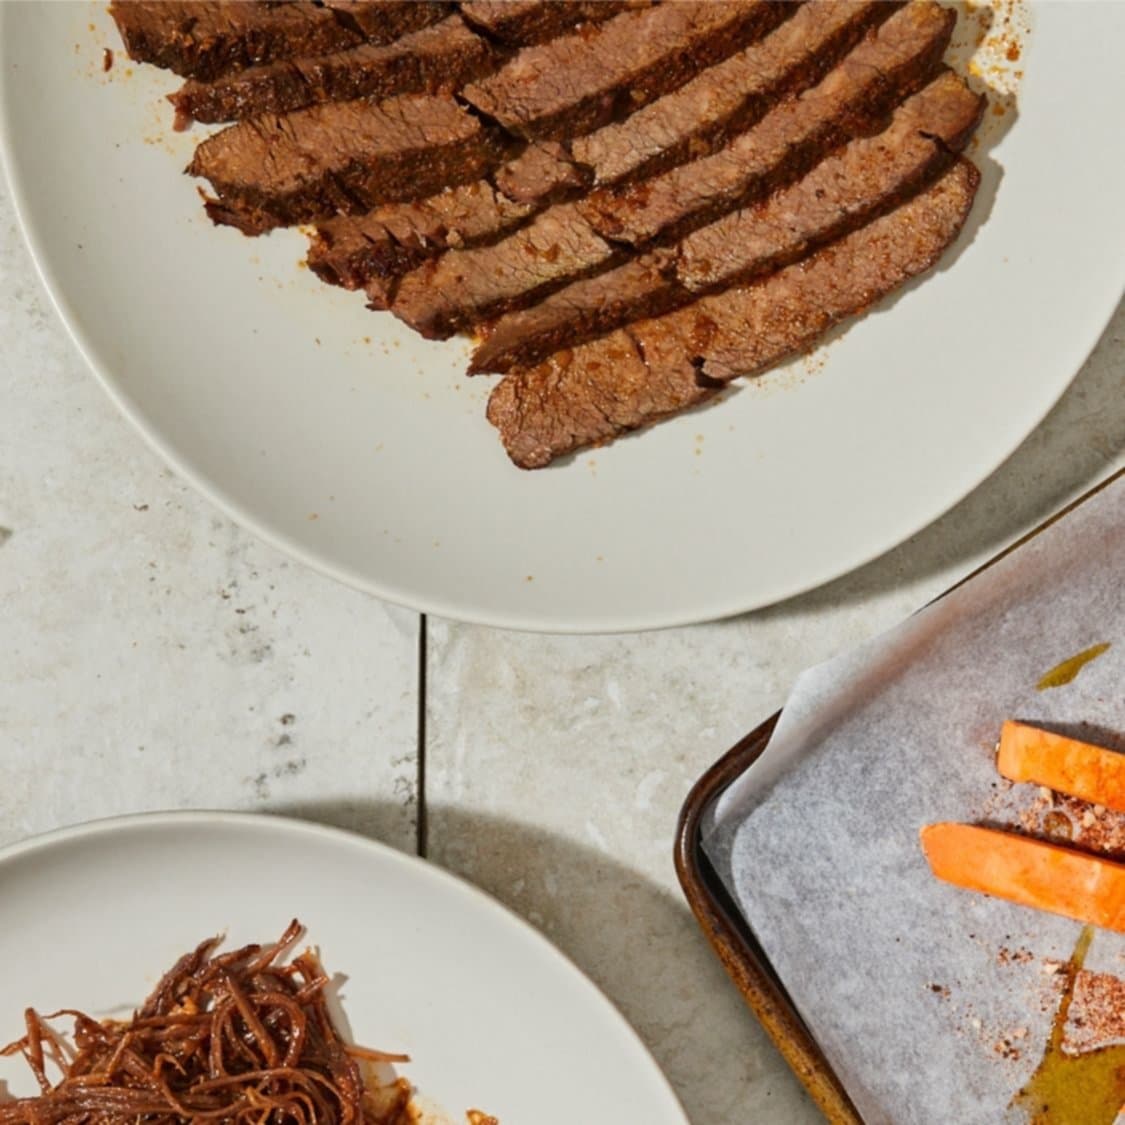 https://fleishigs.com/images/mobile-app/recipes/1863-list-slow-cooker-coffee-rubbed-pulled-deckle.jpg